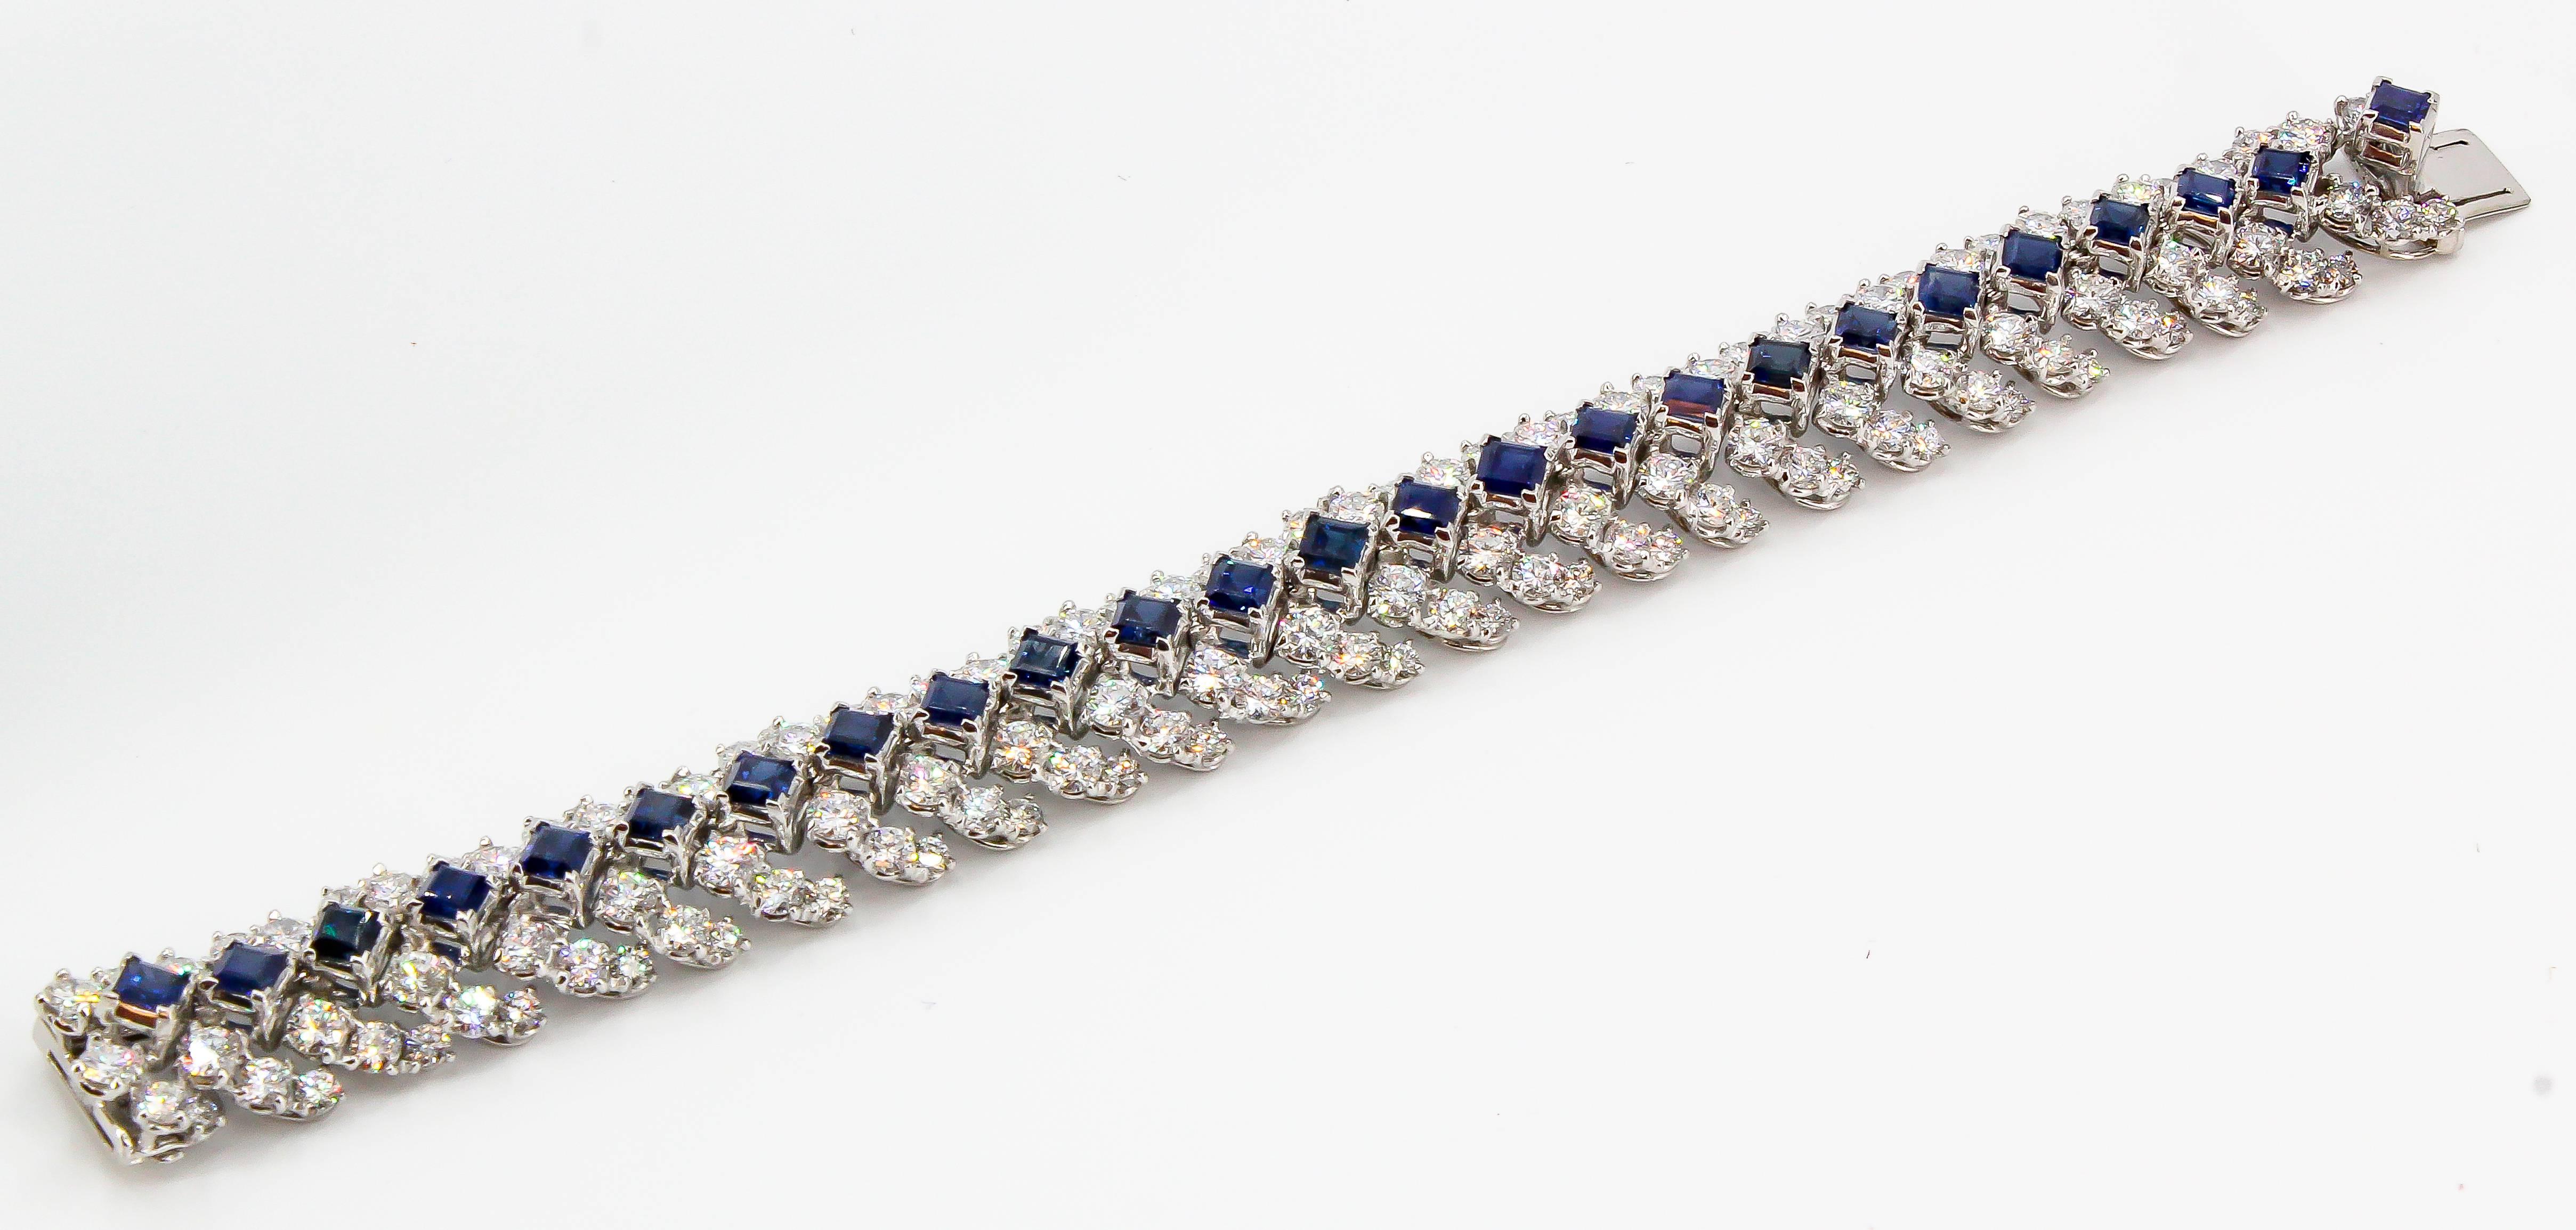 Elegant blue sapphire, diamond and platinum flexible 5 row bracelet by Oscar Heyman, circa 1965. It features rich square cut blue sapphires in the middle row, approx. 9 carats , surrounded by high grade round brilliant cut diamonds throughout,